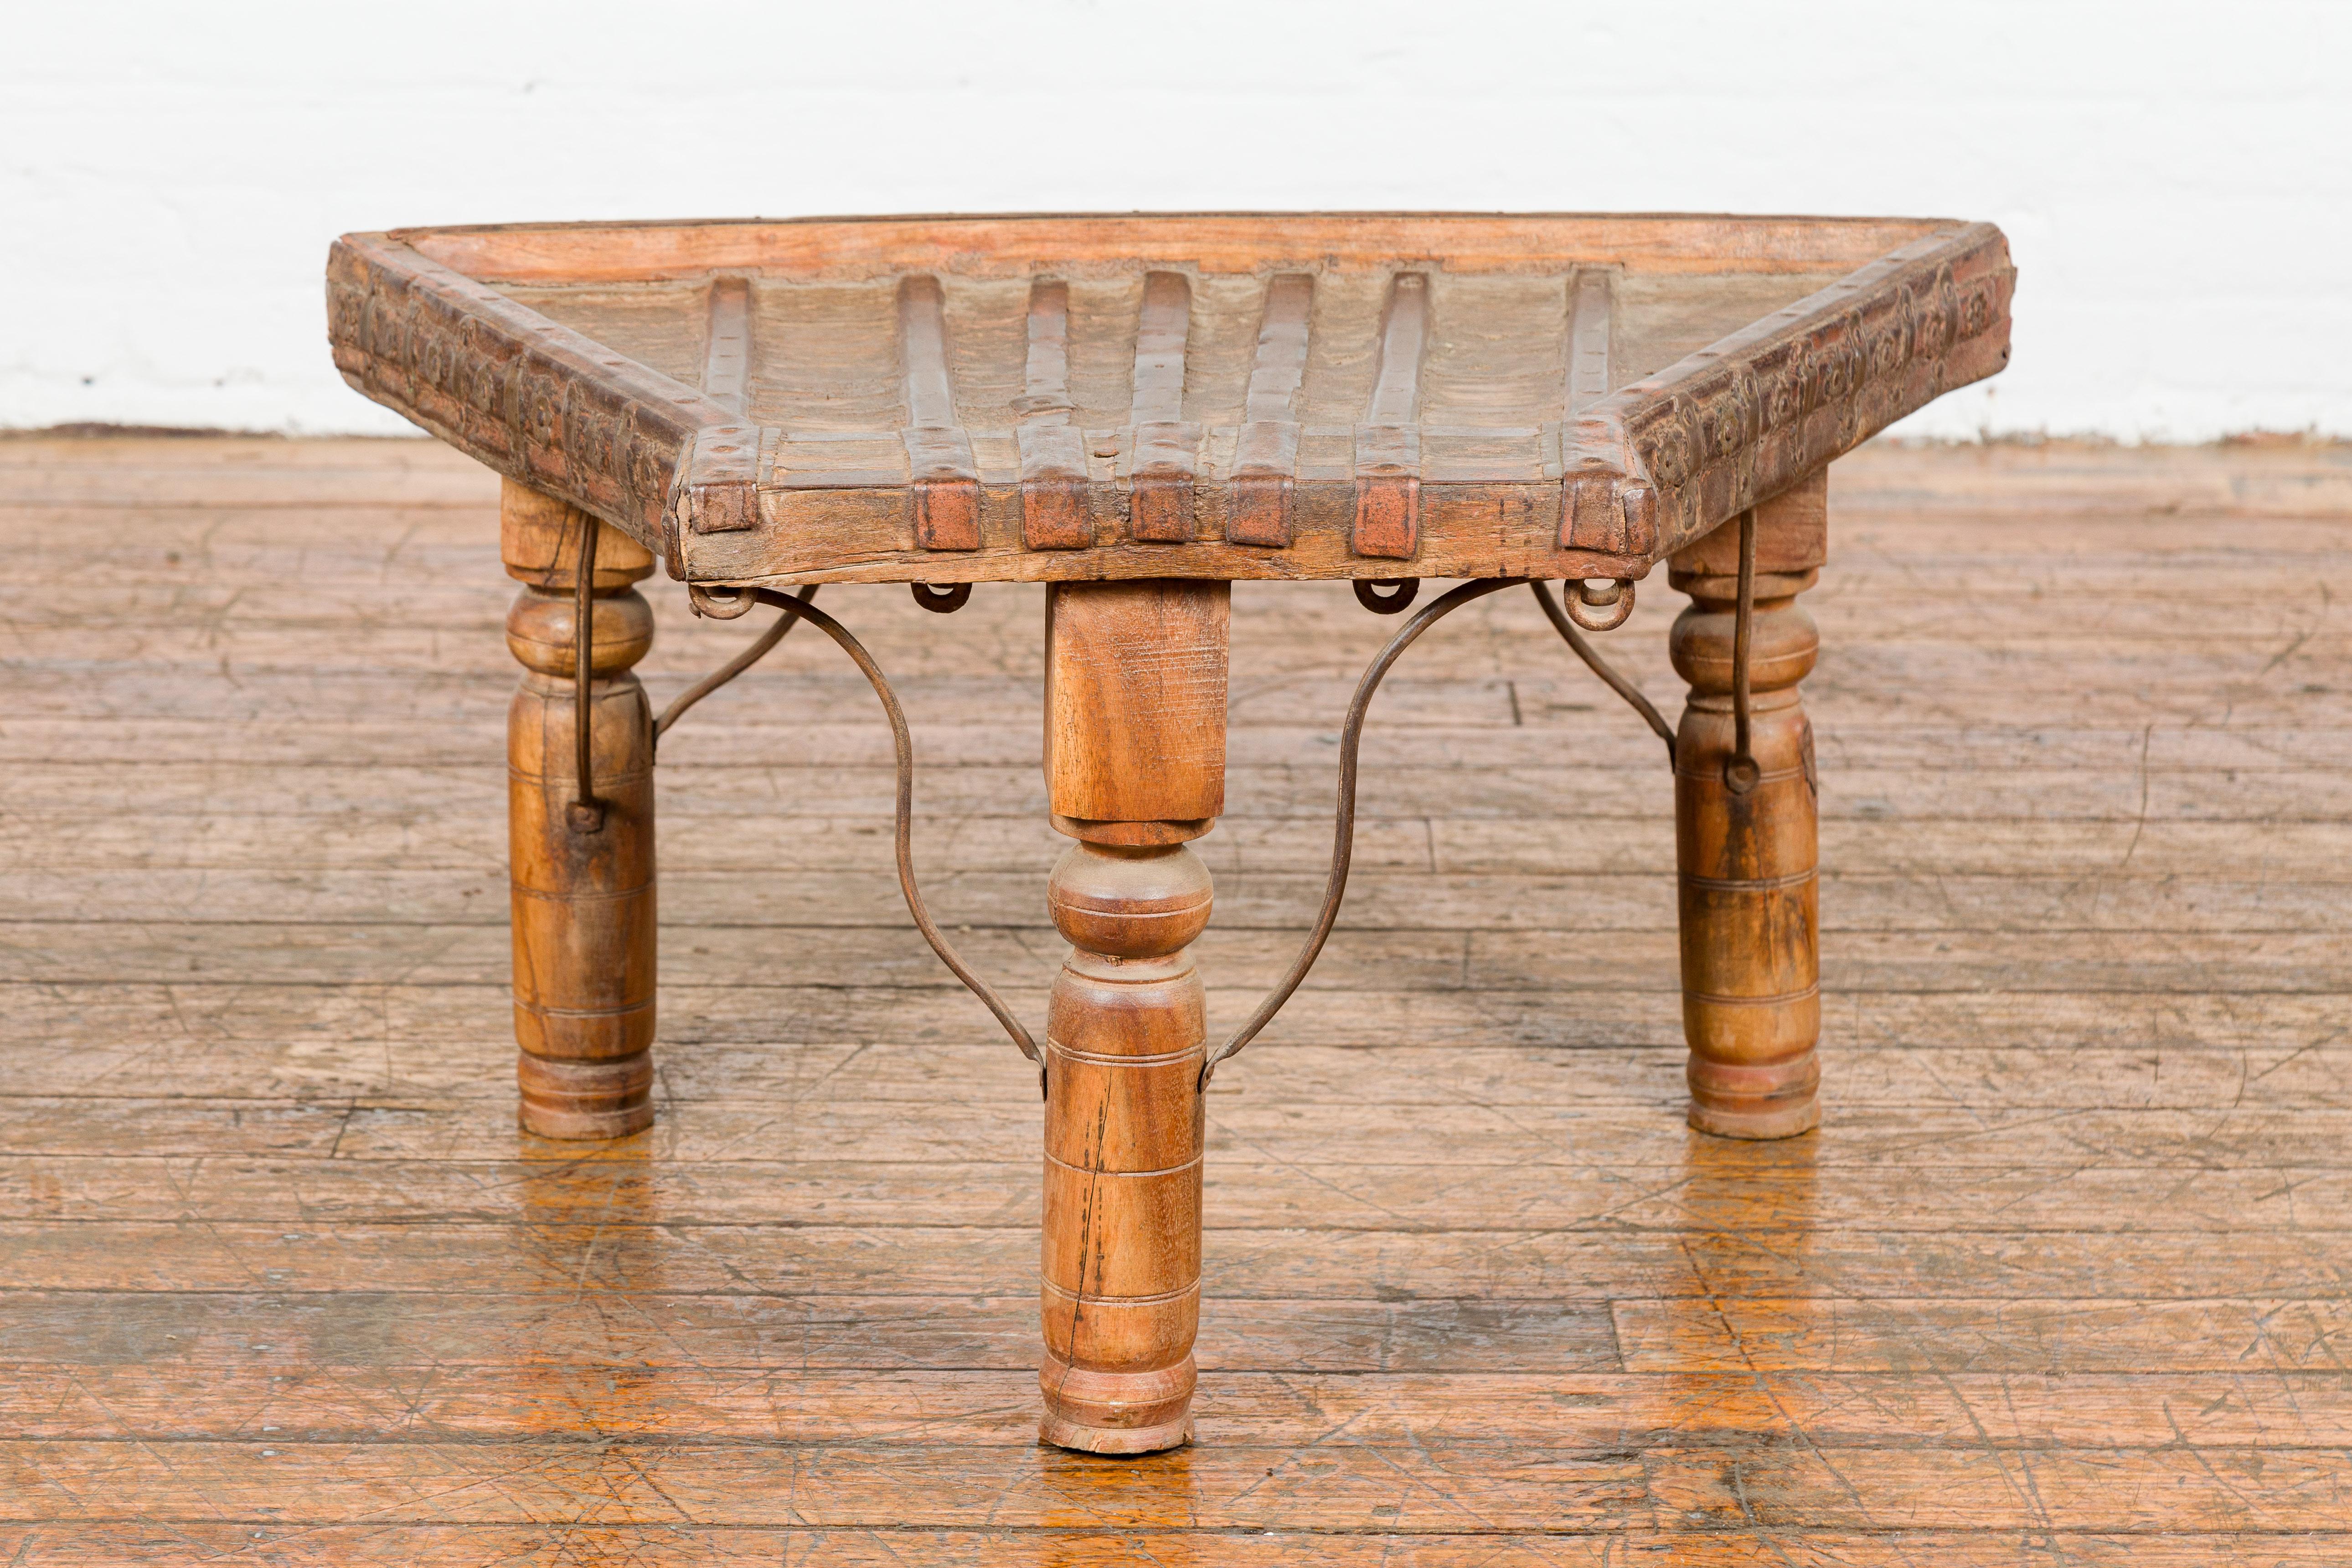 An antique rustic Indian handmade coffee table from the 19th century with trapezoidal top, protruding front, curving iron stretchers, floral shaped studs on the apron, turned baluster legs and nicely weathered patina. Behold the rustic charm of this